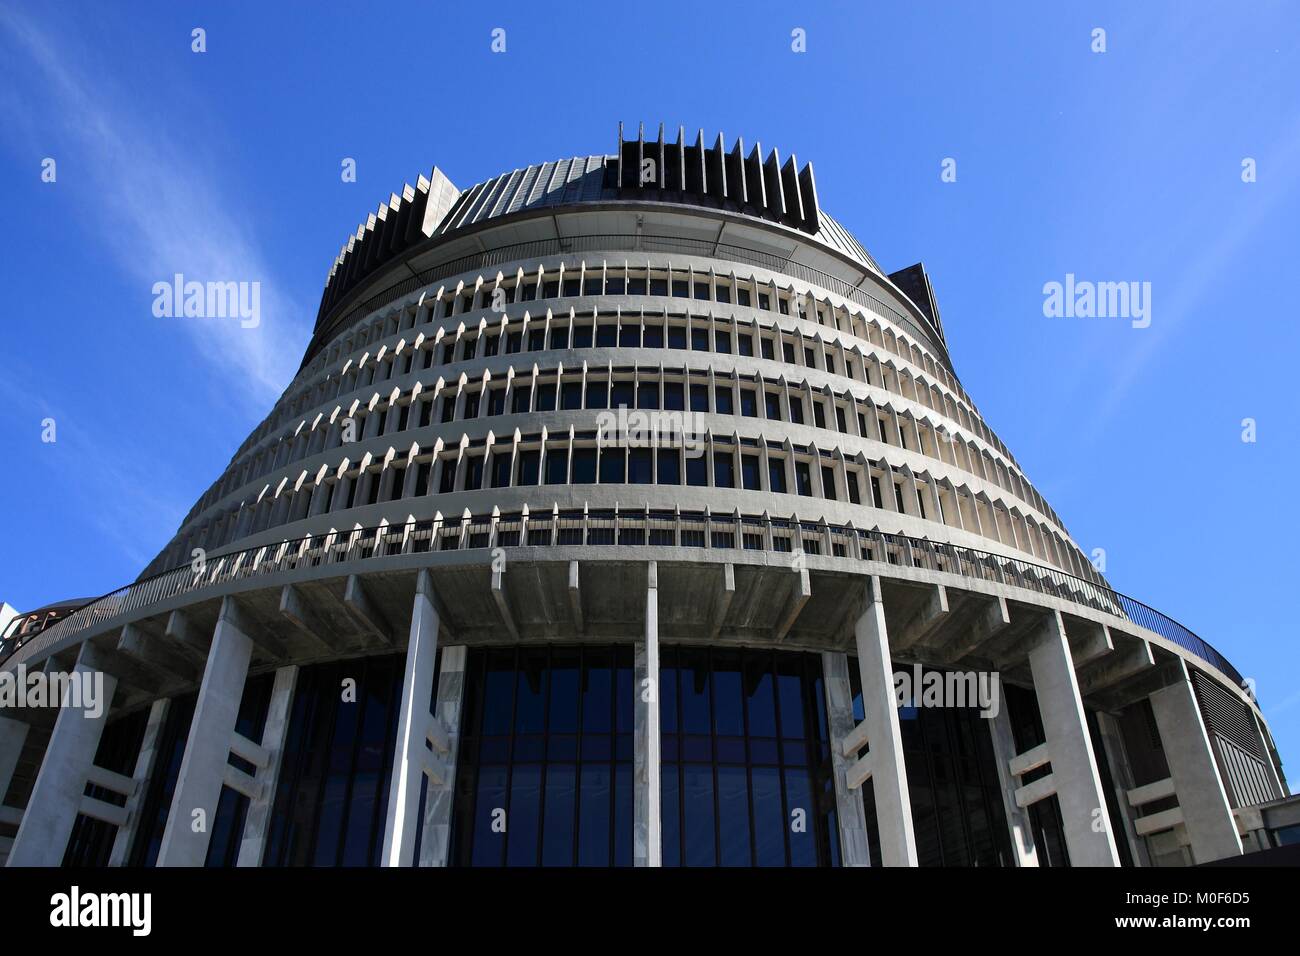 WELLINGTON, NEW ZEALAND - MARCH 7, 2008: Exterior view of New Zealand Parliament building in Wellington. The structure is informally known as the Beeh Stock Photo